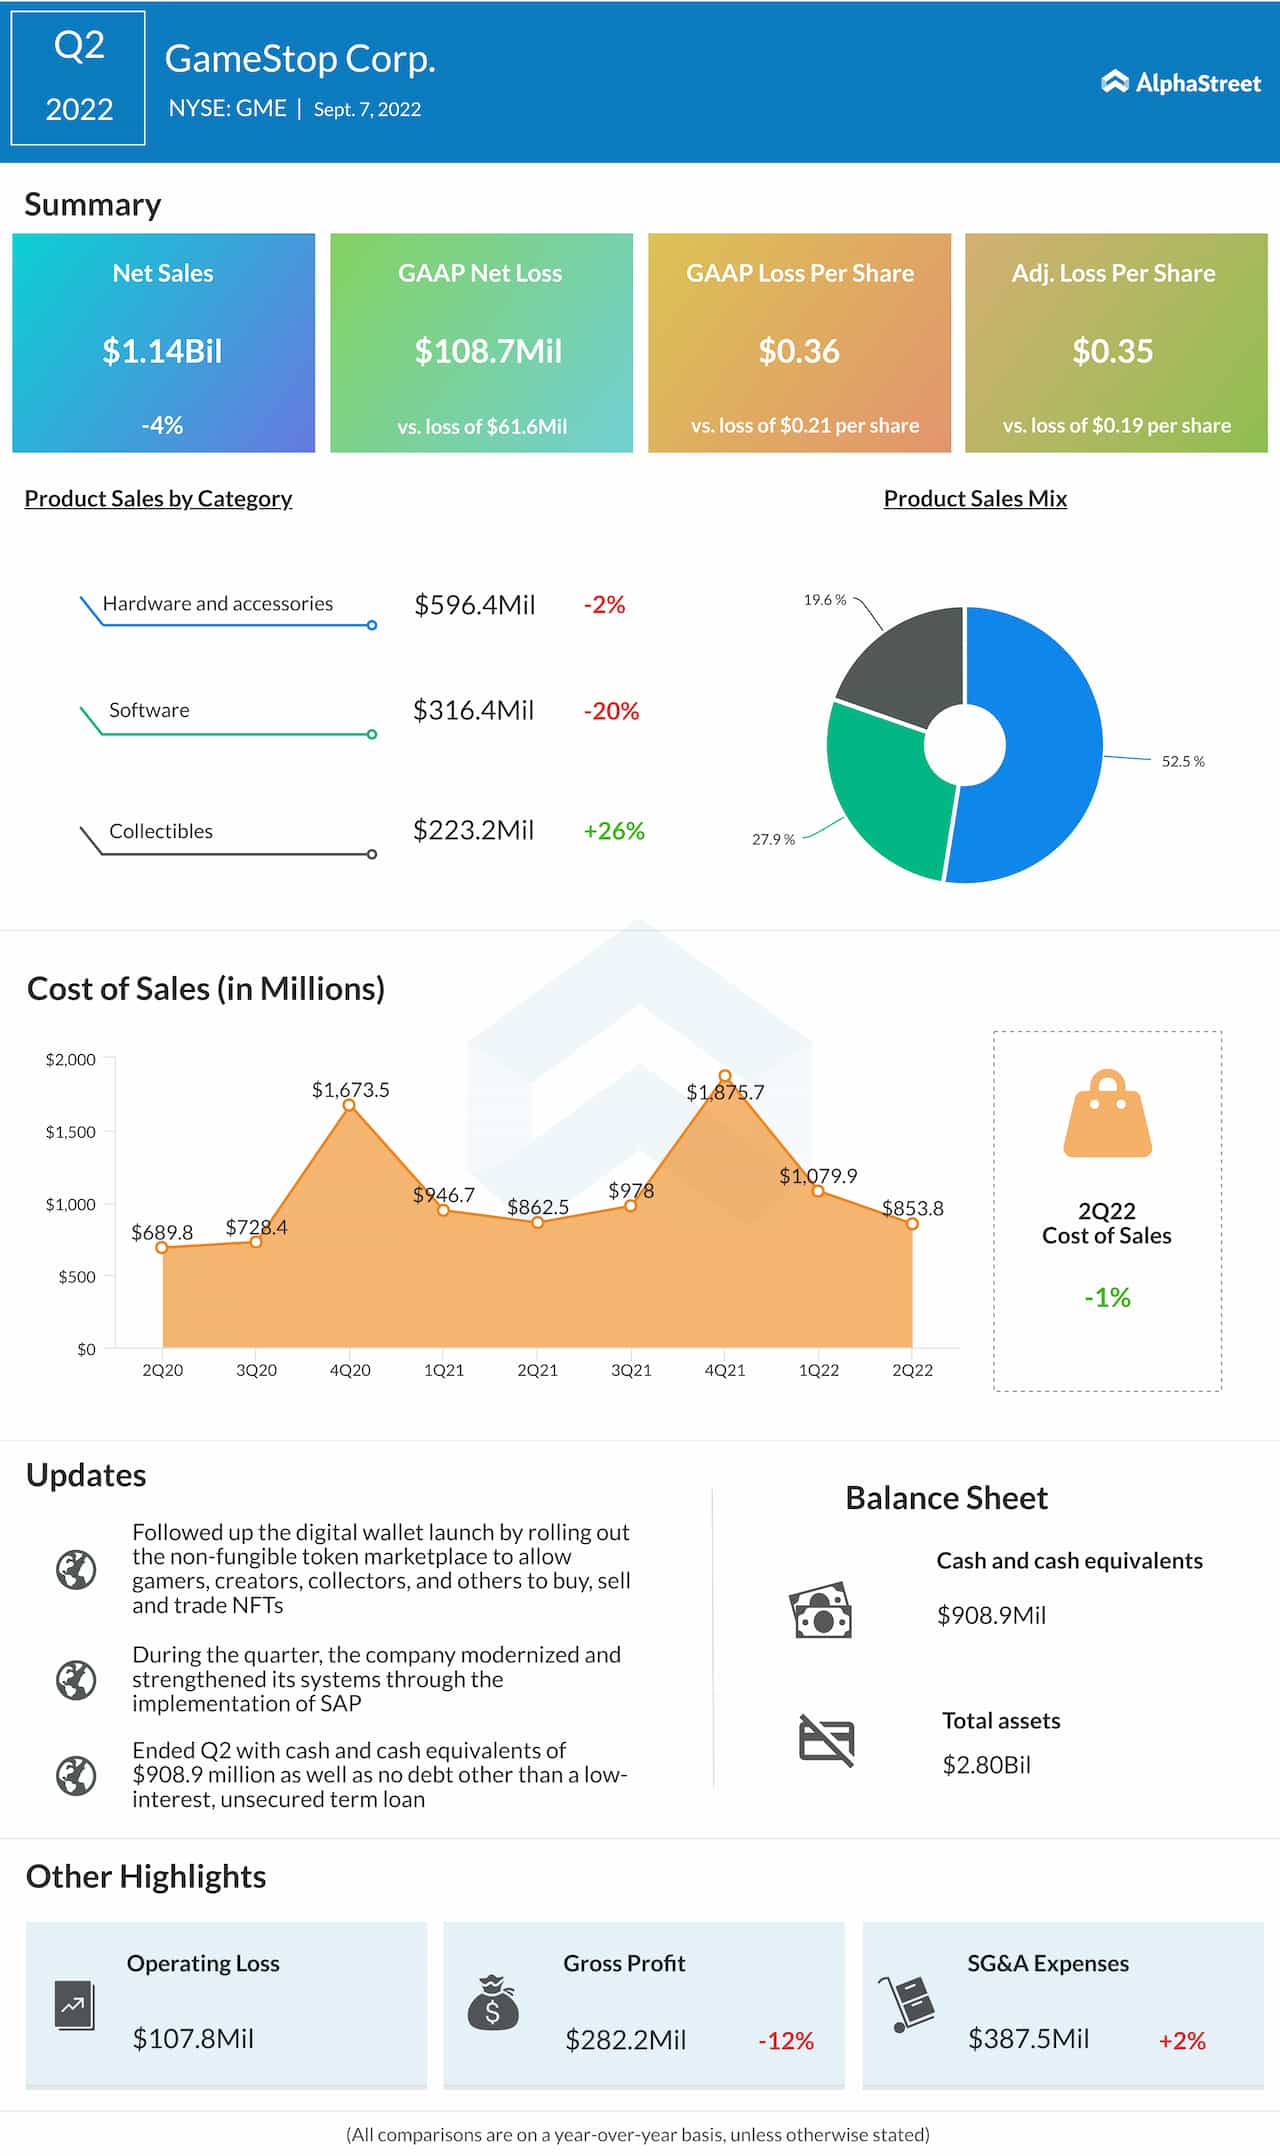 GME Infographic: Highlights of GameStop’s Q2 2022 earnings